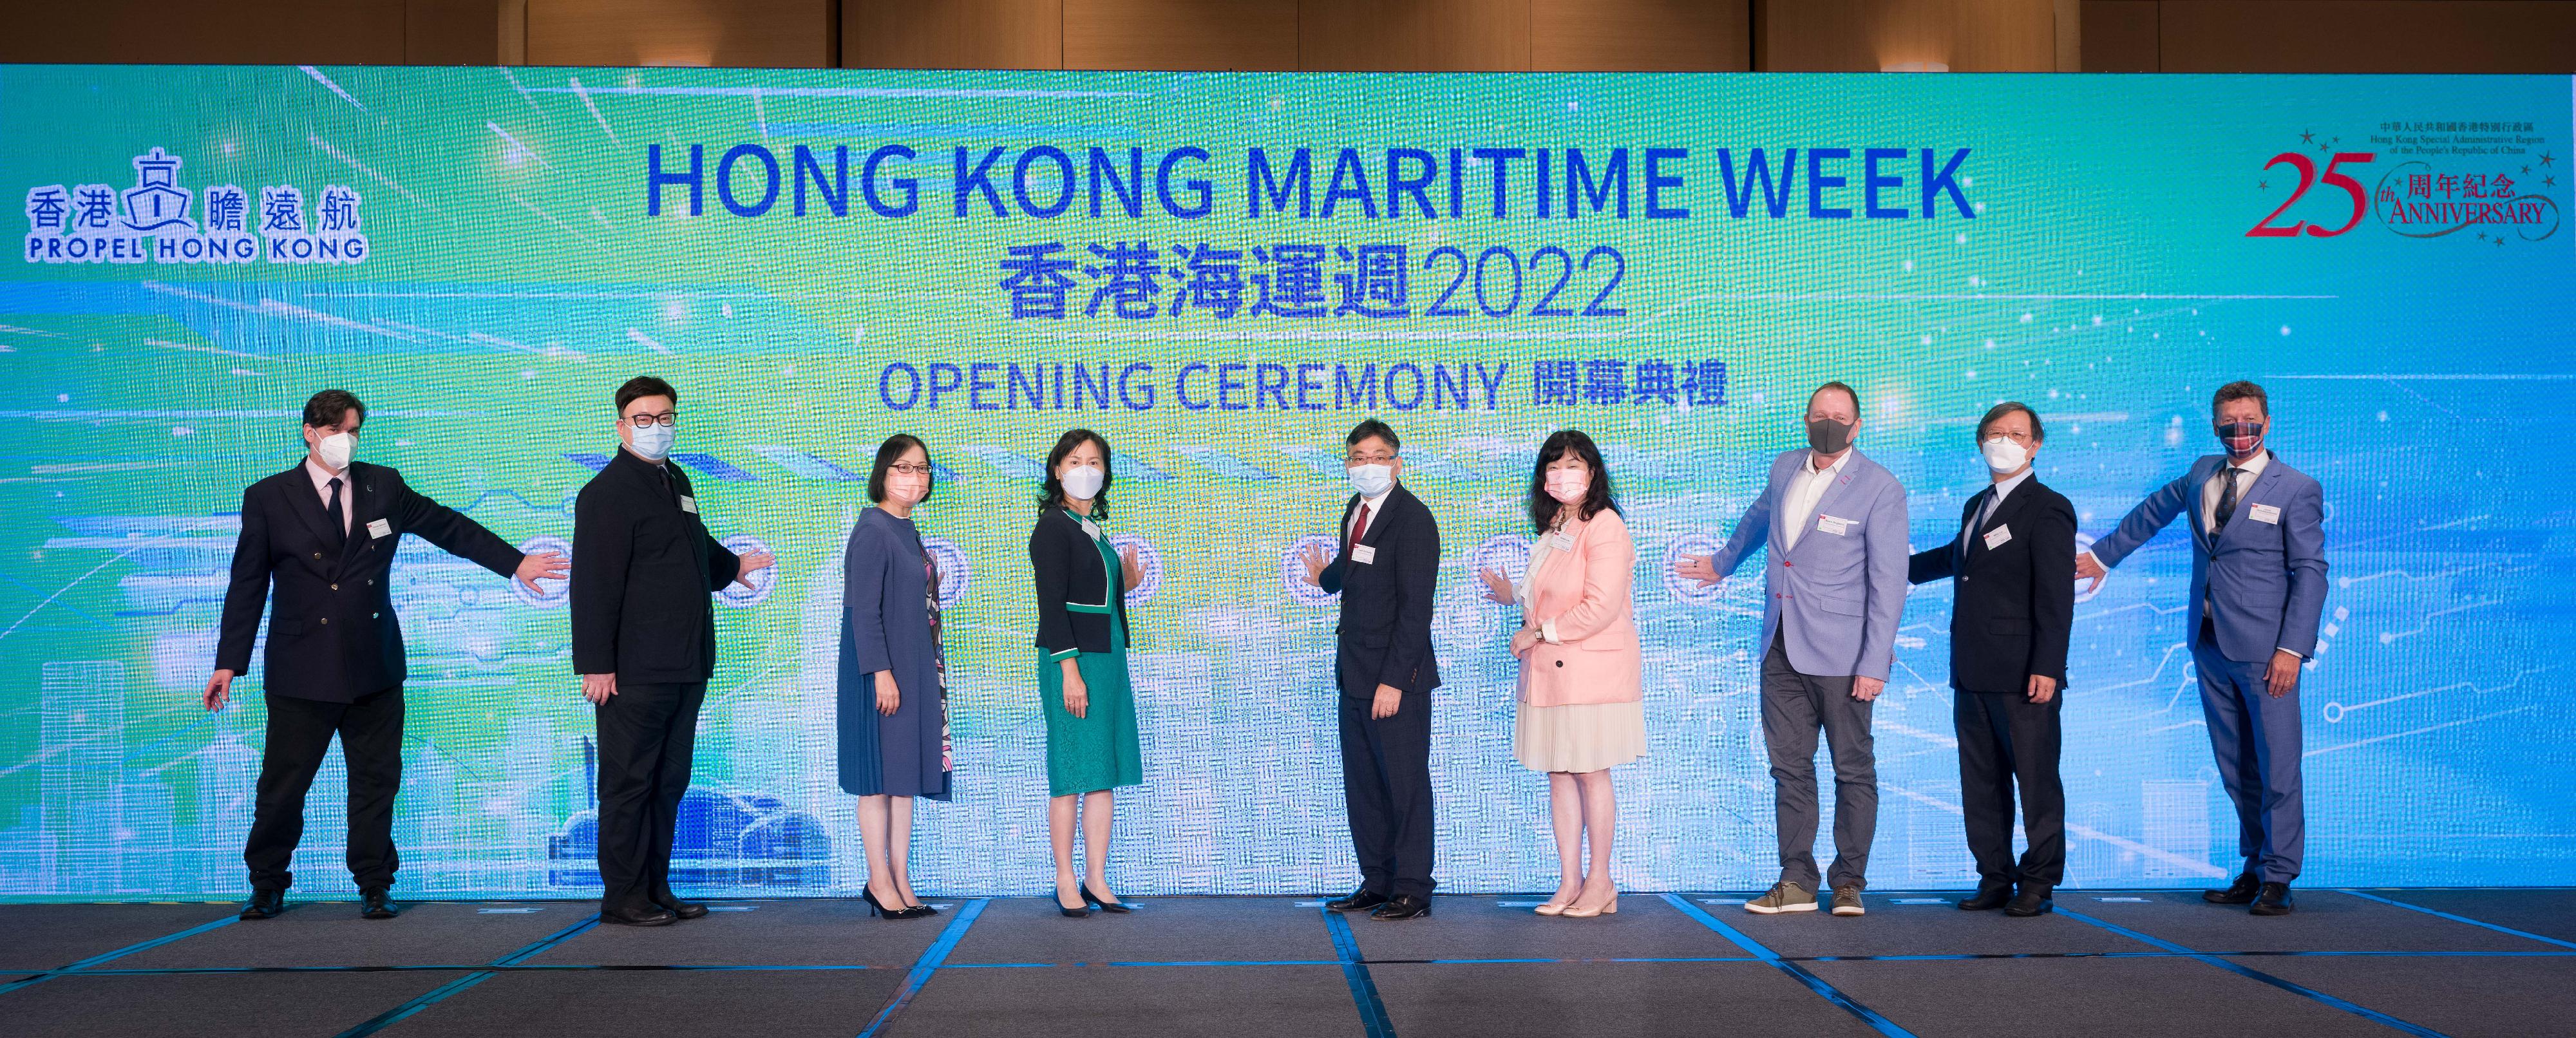 The opening ceremony of Hong Kong Maritime Week 2022, a major annual event of the maritime and port industries in Hong Kong, was held today (November 21). Photo shows the Chairman of the Hong Kong Maritime and Port Board (HKMPB) and the Secretary for Transport and Logistics, Mr Lam Sai-hung (centre), together with the Permanent Secretary for Transport and Logistics, Ms Mable Chan (fourth left); the Director of Marine, Ms Carol Yuen (third left); the Chairman of the Promotion and External Relations Committee of the HKMPB, Miss Rosita Lau (fourth right); the Chairman of the Maritime and Port Development Committee of the HKMPB, Mr Bjorn Hojgaard (third right); the Chairman of the Manpower Development Committee of the HKMPB, Mr Willy Lin (second right); the Chairman of the Hong Kong Shipowners Association, Mr Wellington Koo (second left); the Deputy Secretary General of the International Chamber of Shipping, Mr Simon Bennett (first left); and the Director of Hong Kong Maritime Museum, Professor Joost Schokkenbroek (first right), officiating at the ceremony.